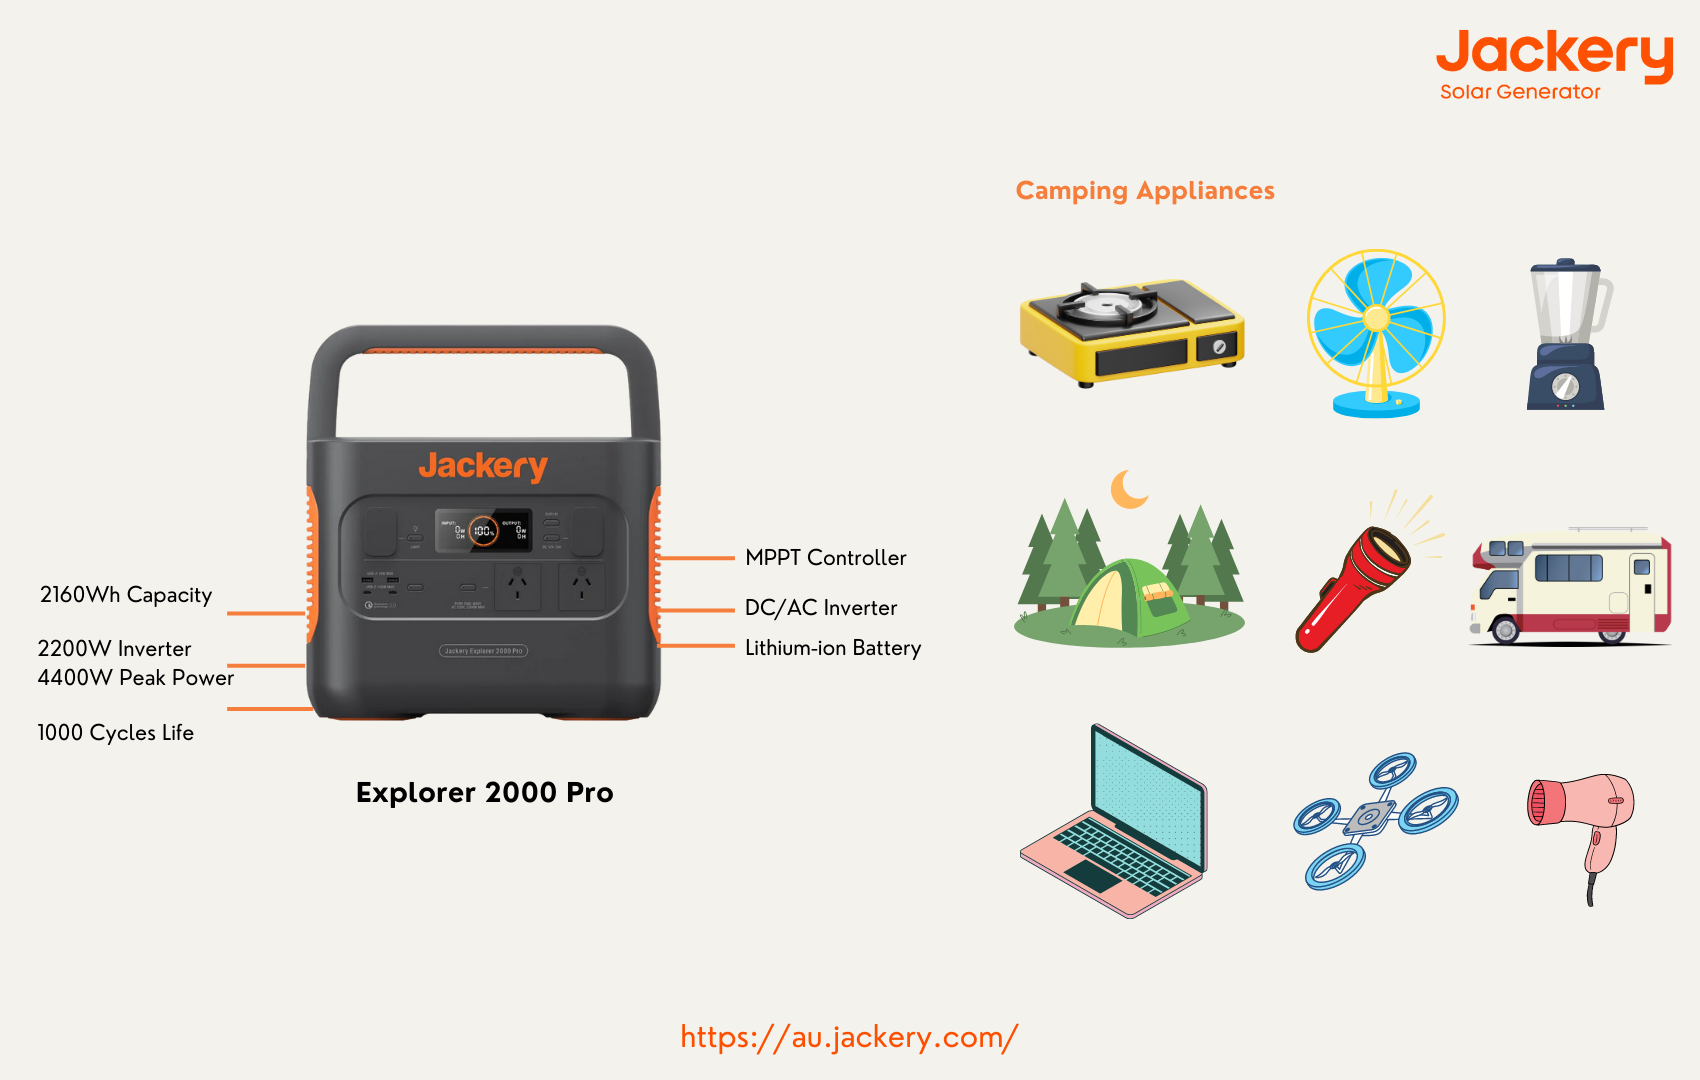 Jackery Explorer 2000 Pro for camping